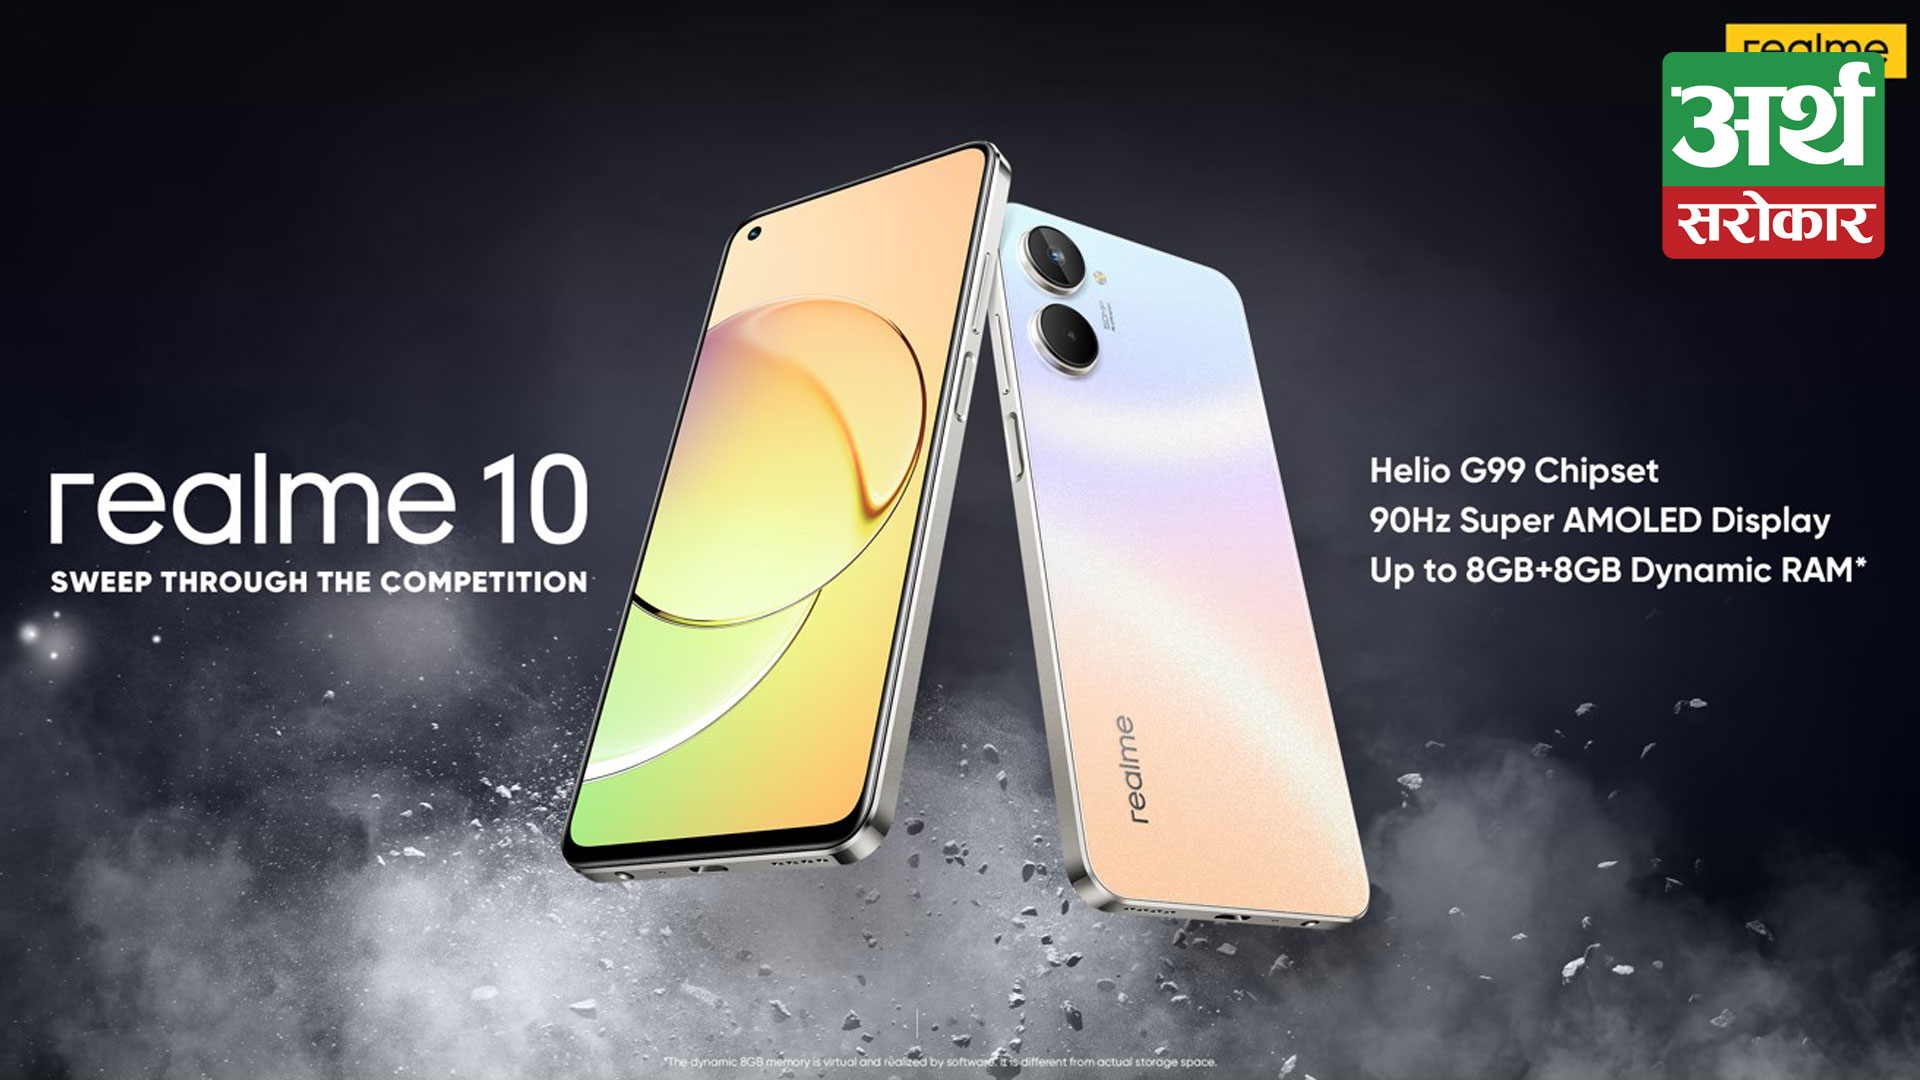 Realme’s has launched its slimmest set, starting price Rs 29,999 for 8+128GB variant.